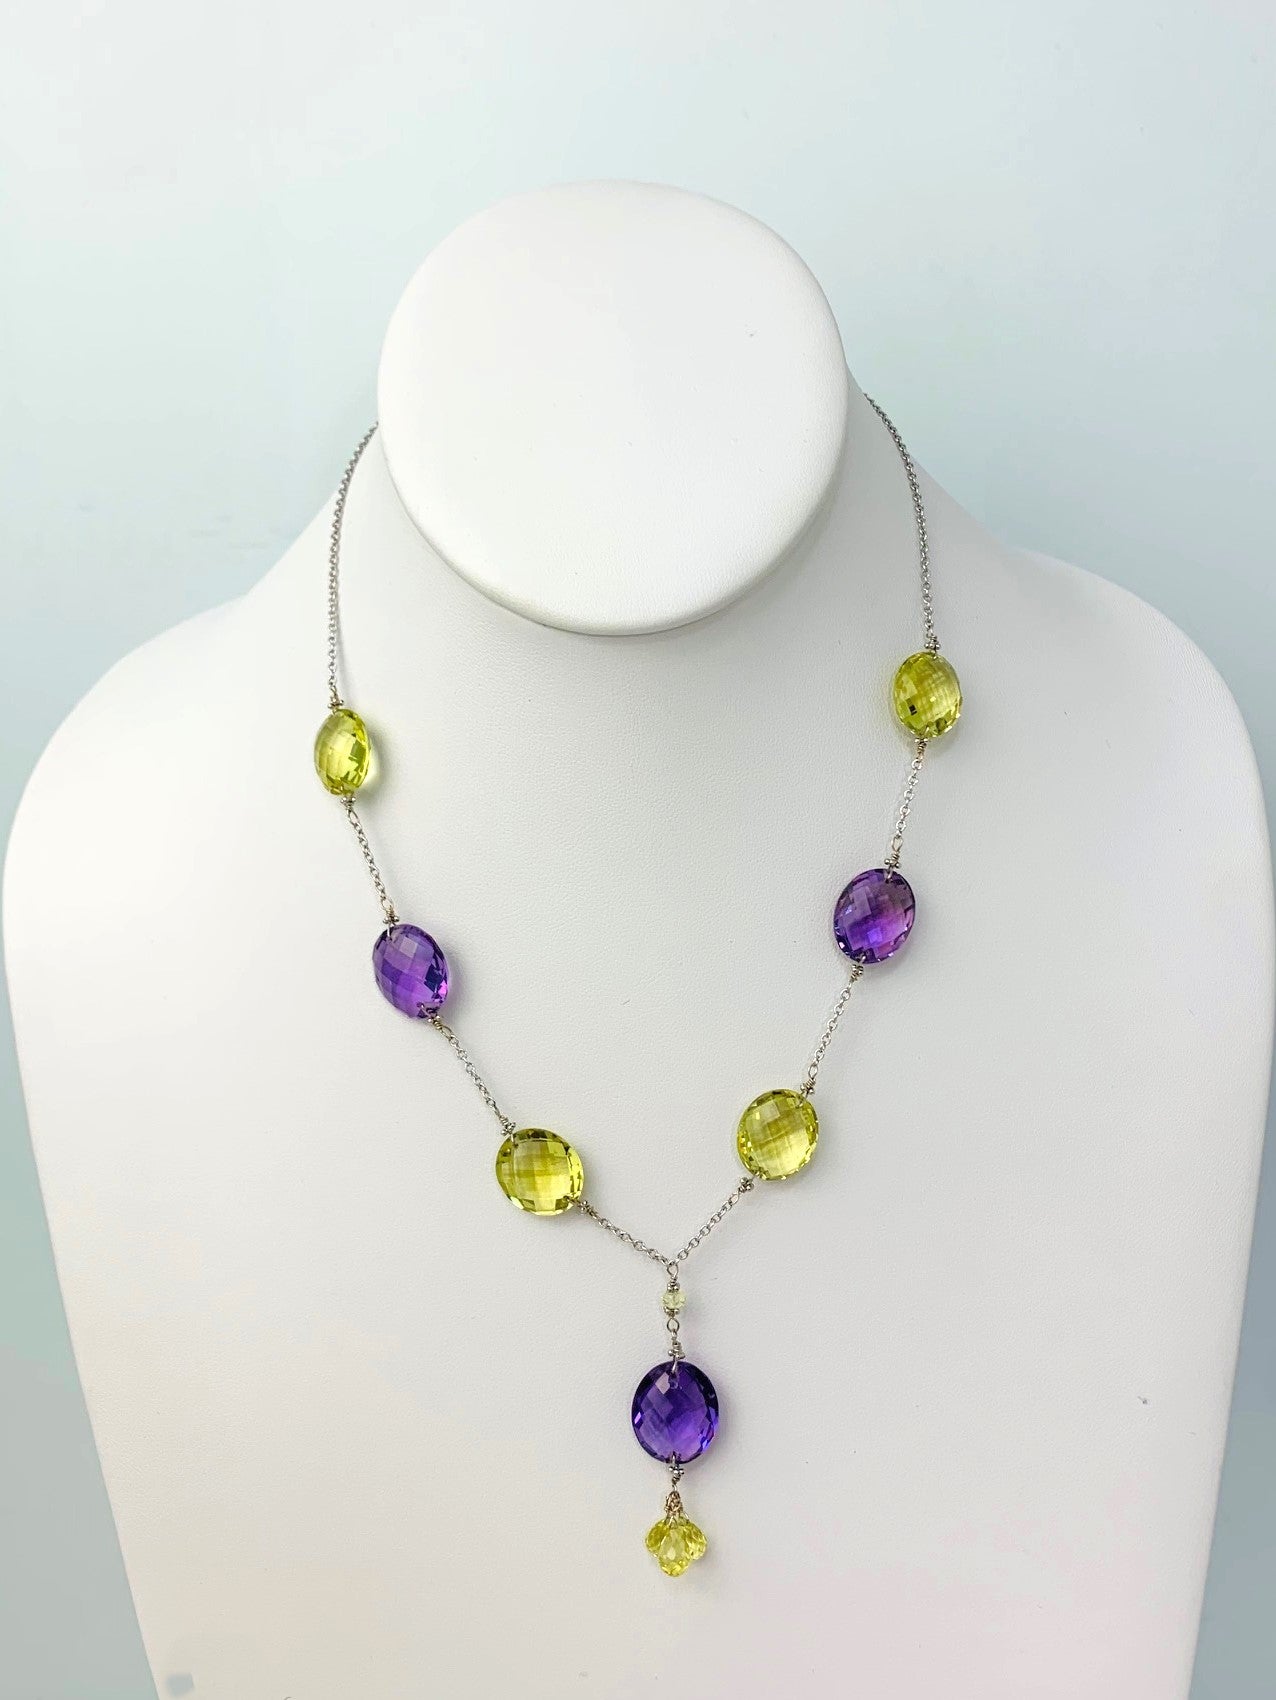 17-18" Lemon Quartz And Amethyst Station Necklace With Oval Checkerboard And 3 Briolette Tassel Drop in 14KW - NCK-378-TASTNCGM14W-LQAMY-18